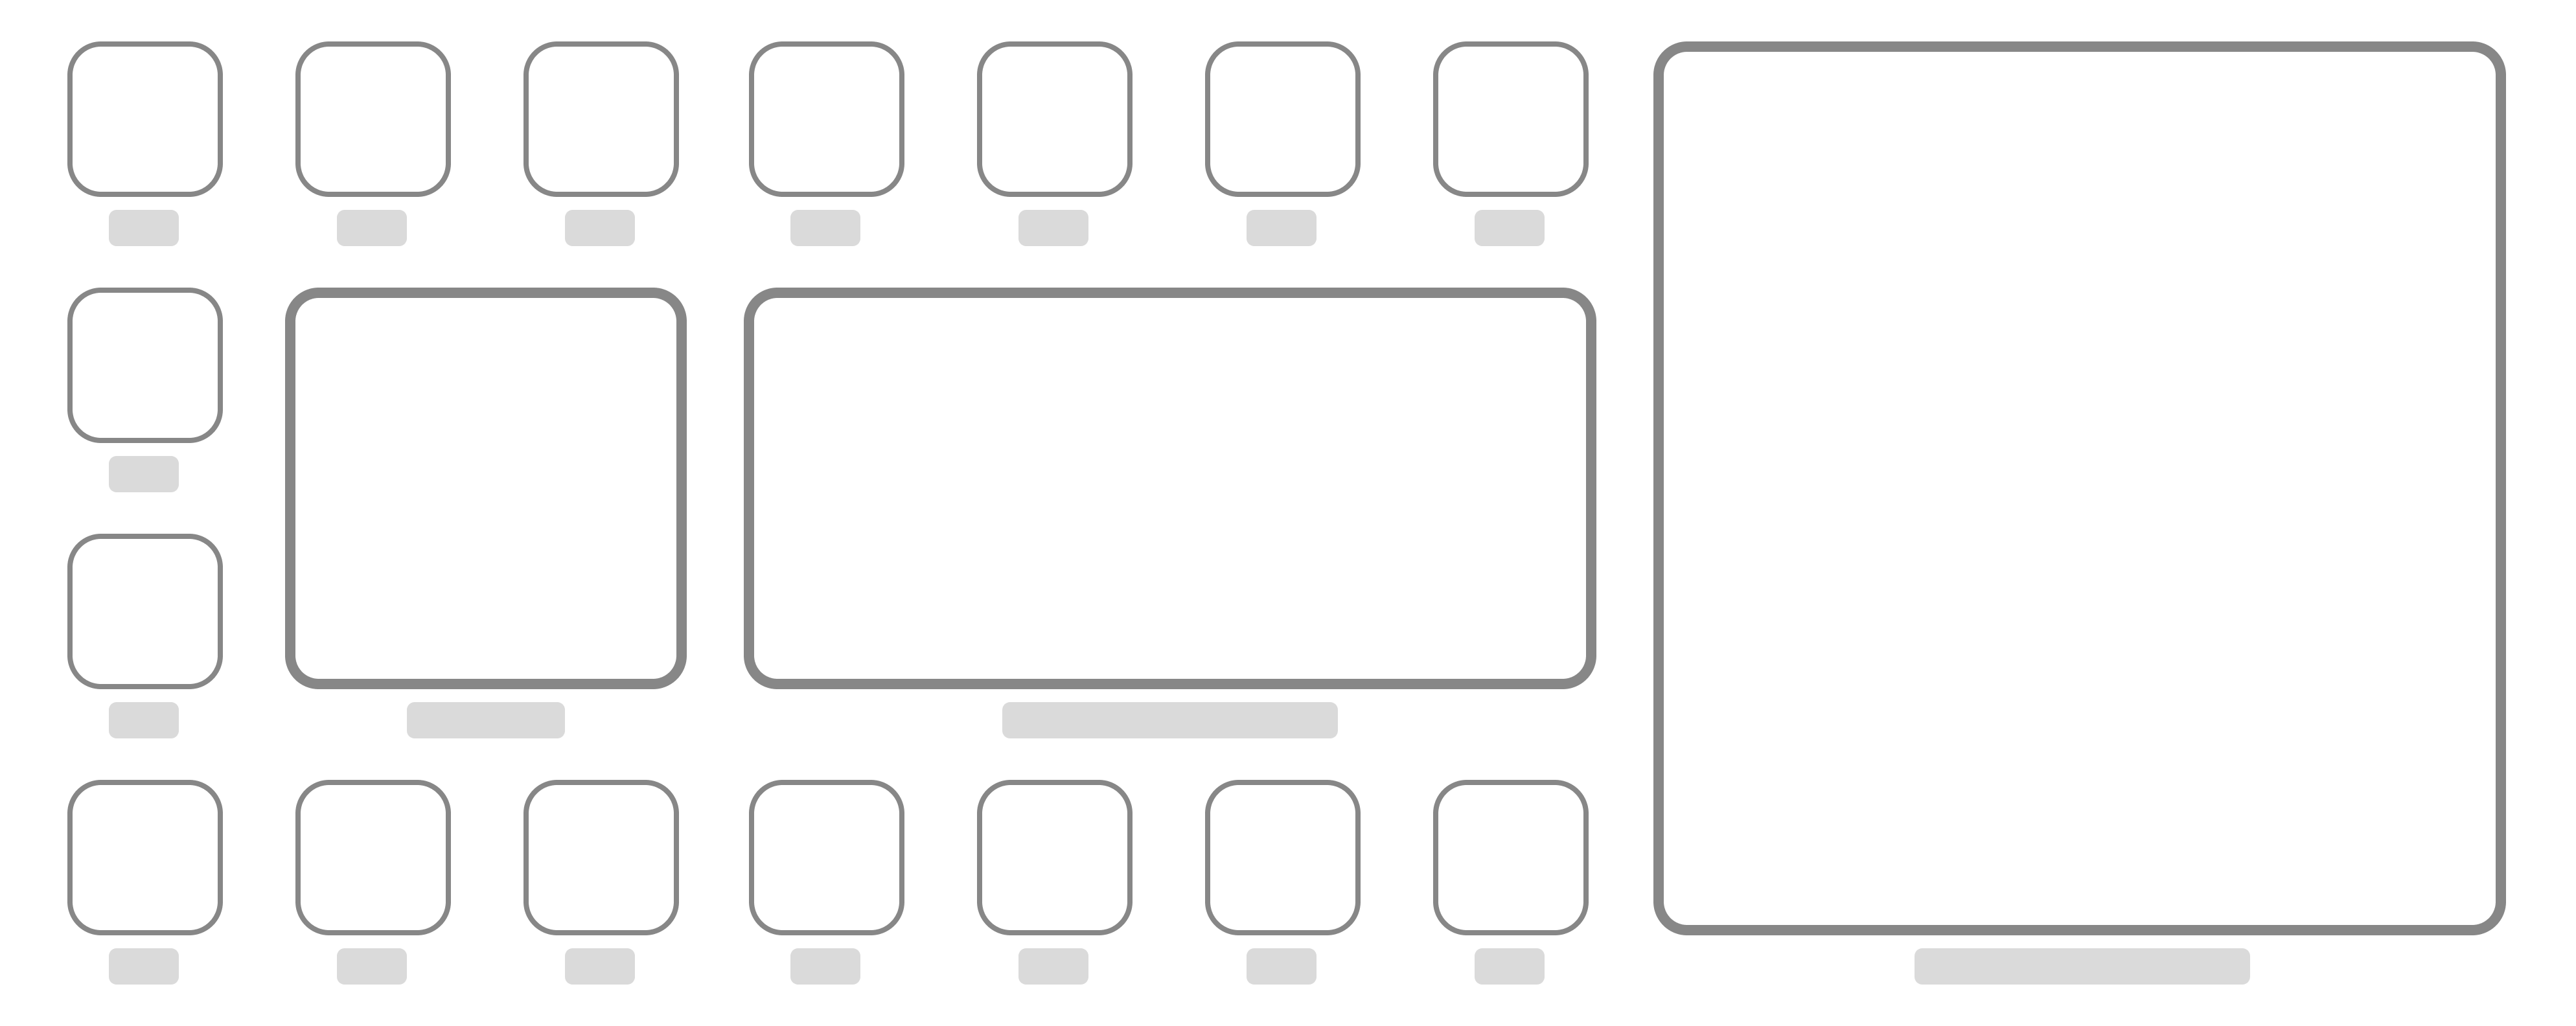 Different sizes for widgets (small, medium, large)